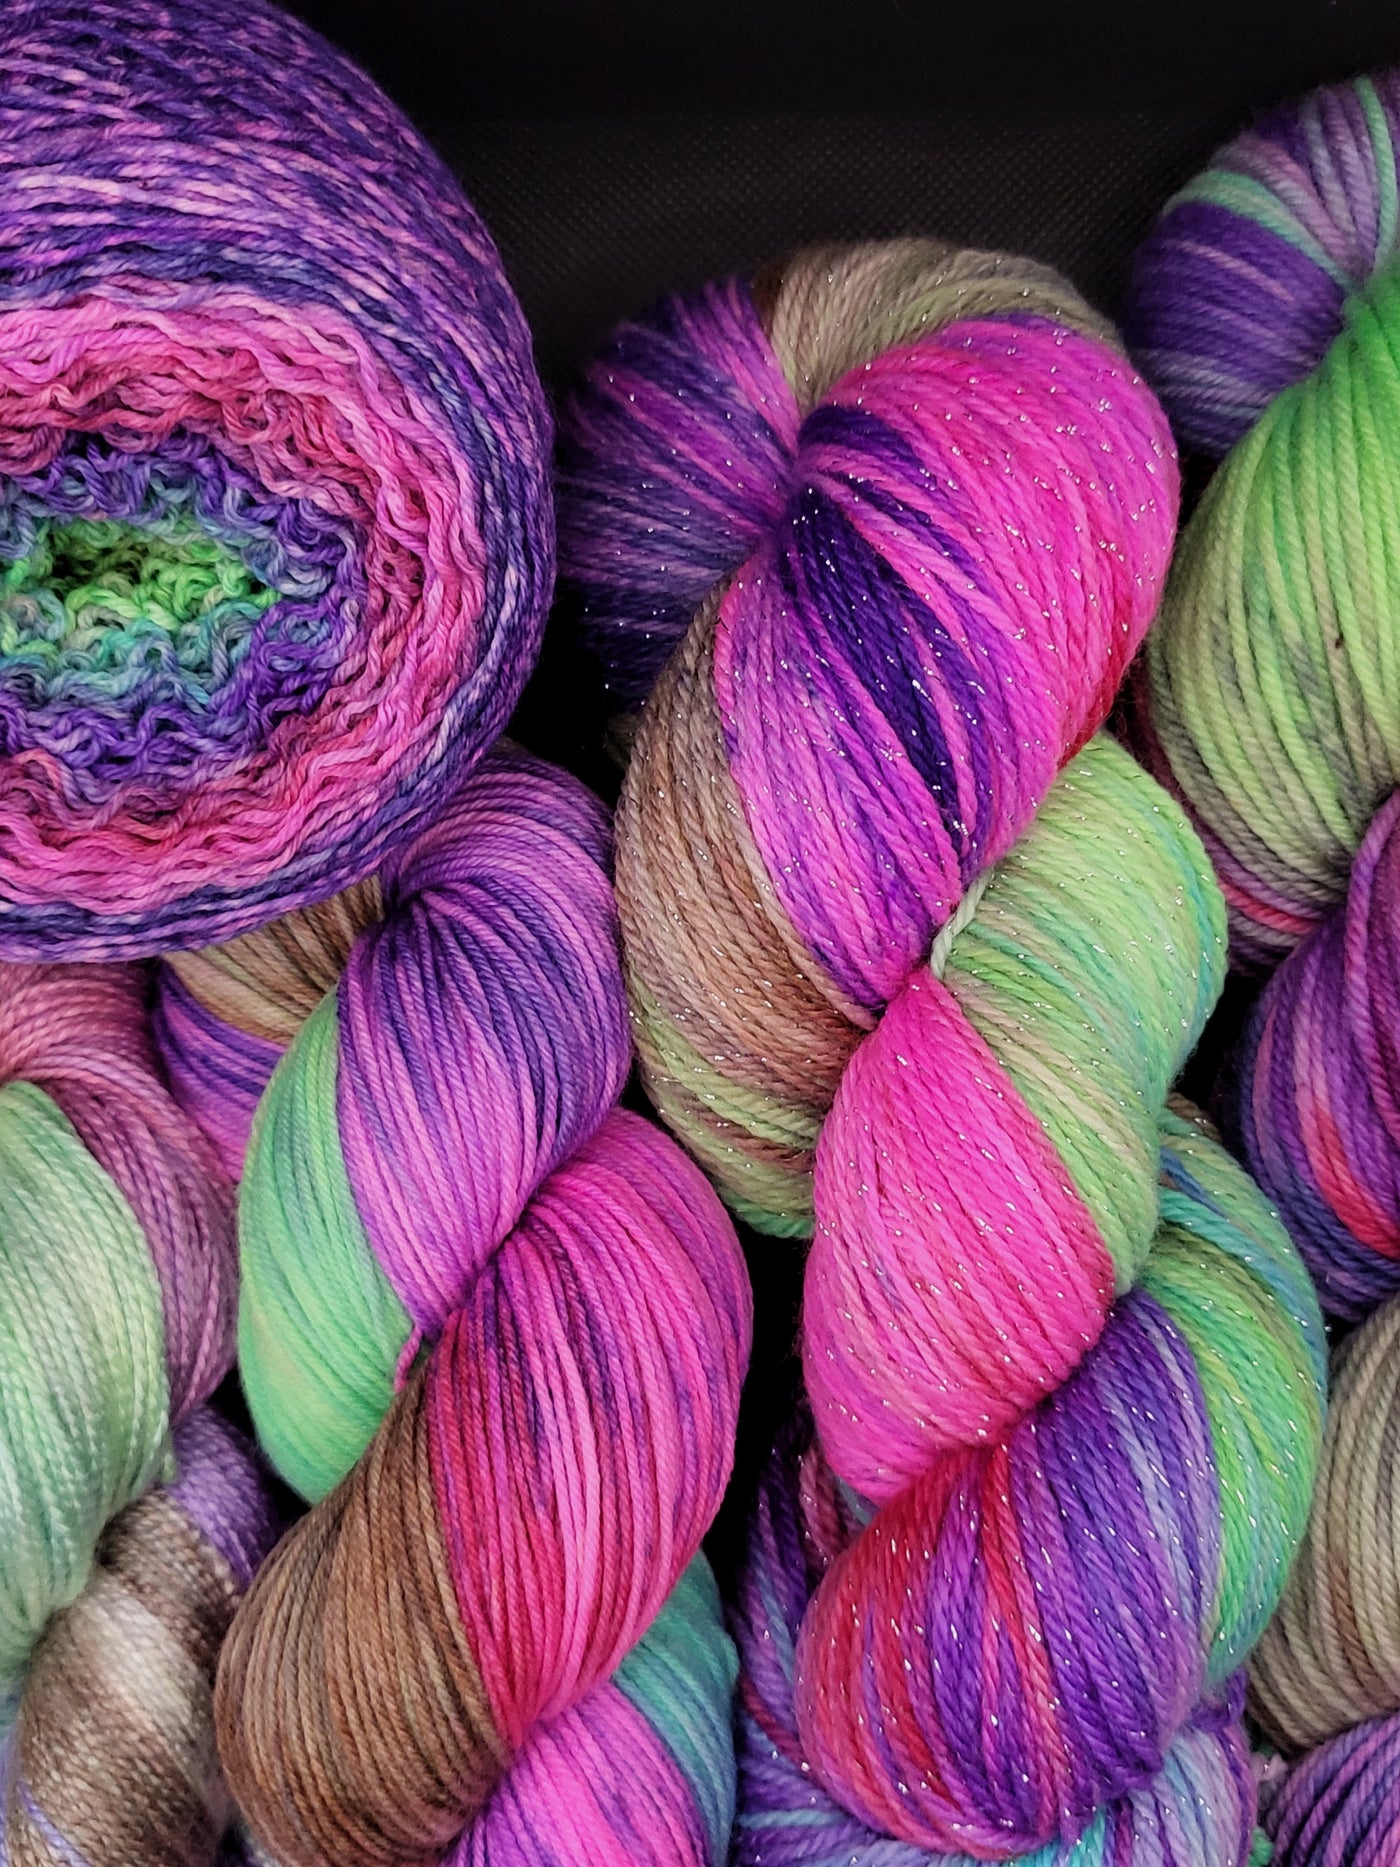 UP North Yarns Trunk Show